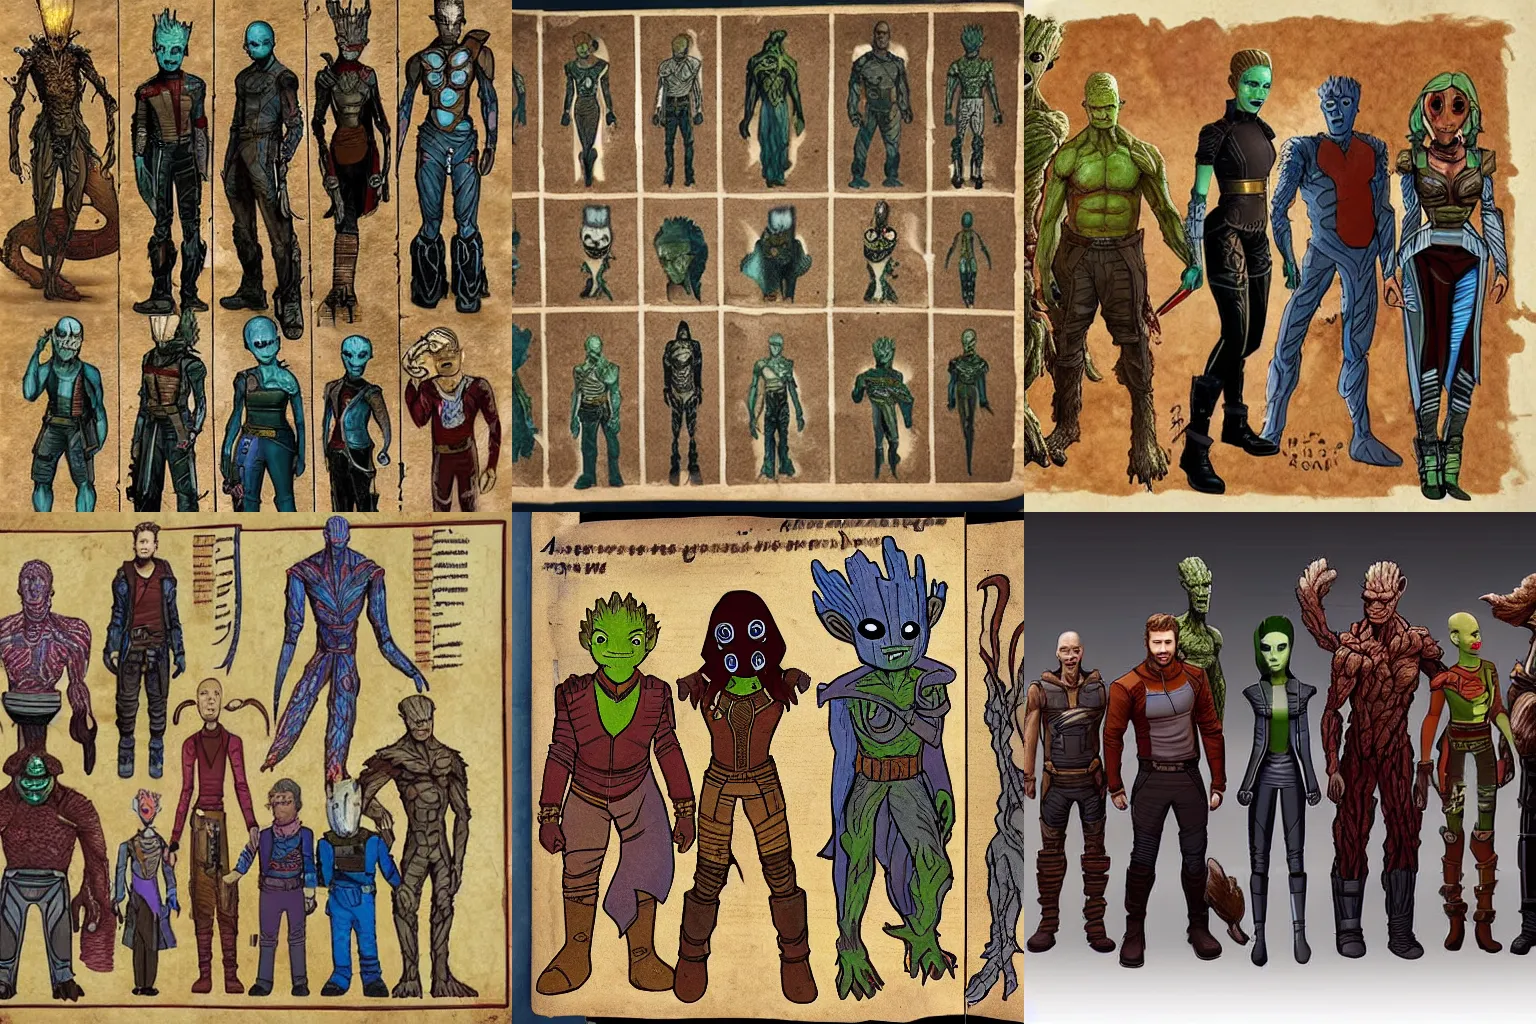 Prompt: ancient manuscript showing characters from Guardians of the Galaxy, Star Lord, Groot, Rocket, Gamora and Drax